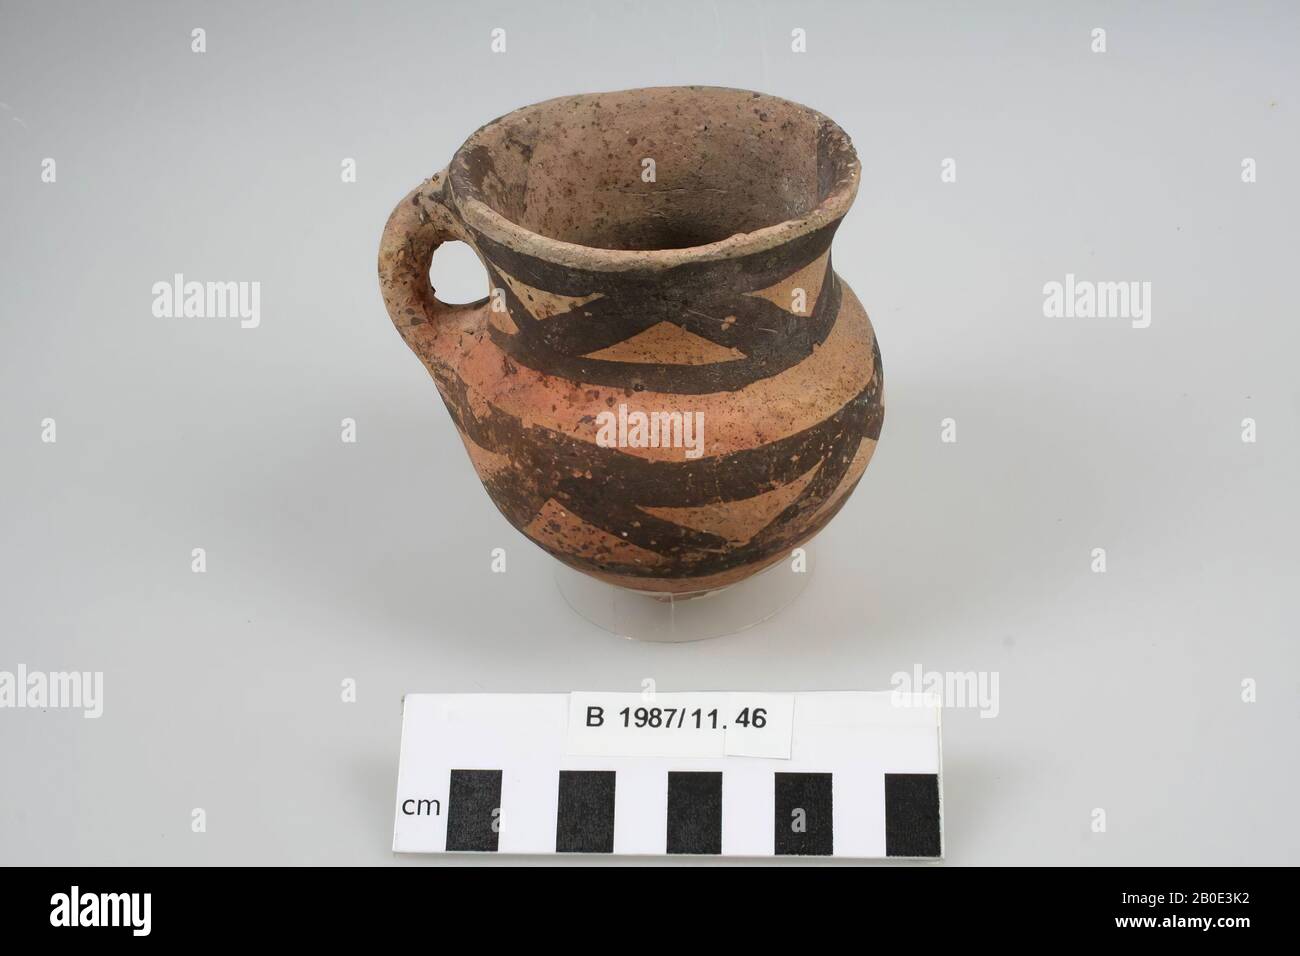 An earthenware cup with a foot and an oval body that goes through a round  bend in a high, concave neck. The edge is outwards and is finished  undiluted and irregular. A